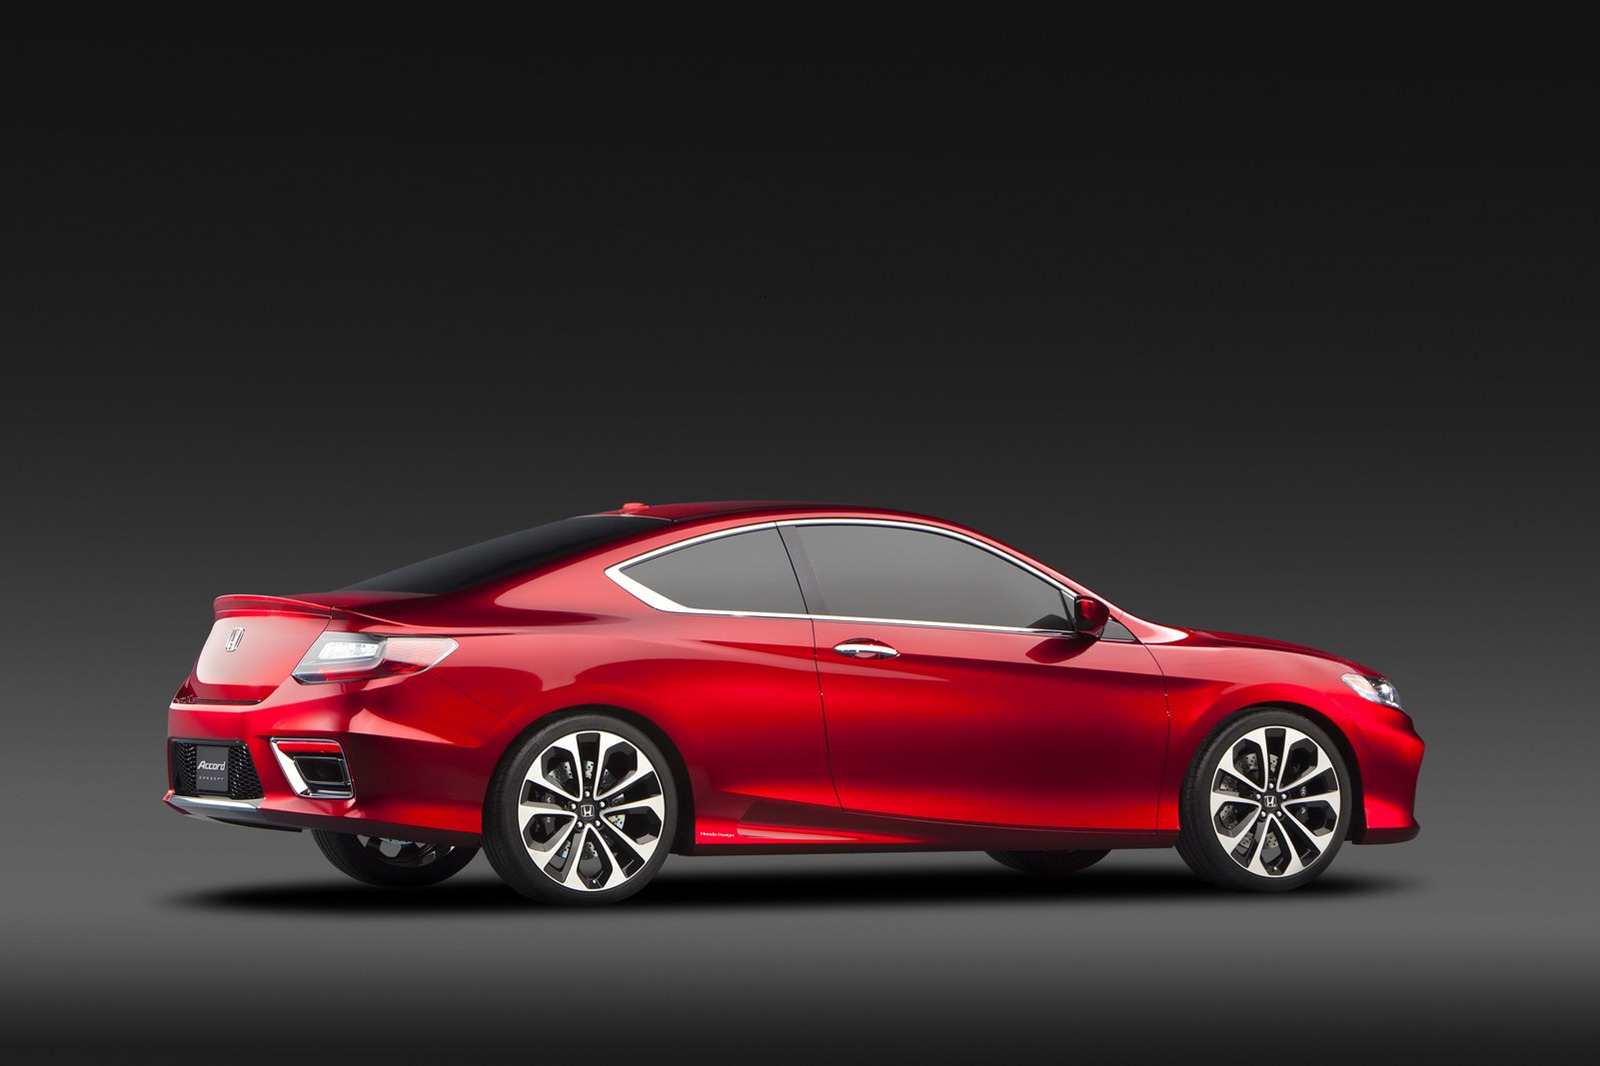 2013 Honda Accord Coupe Concept Previews 9th Generation Model, Coming